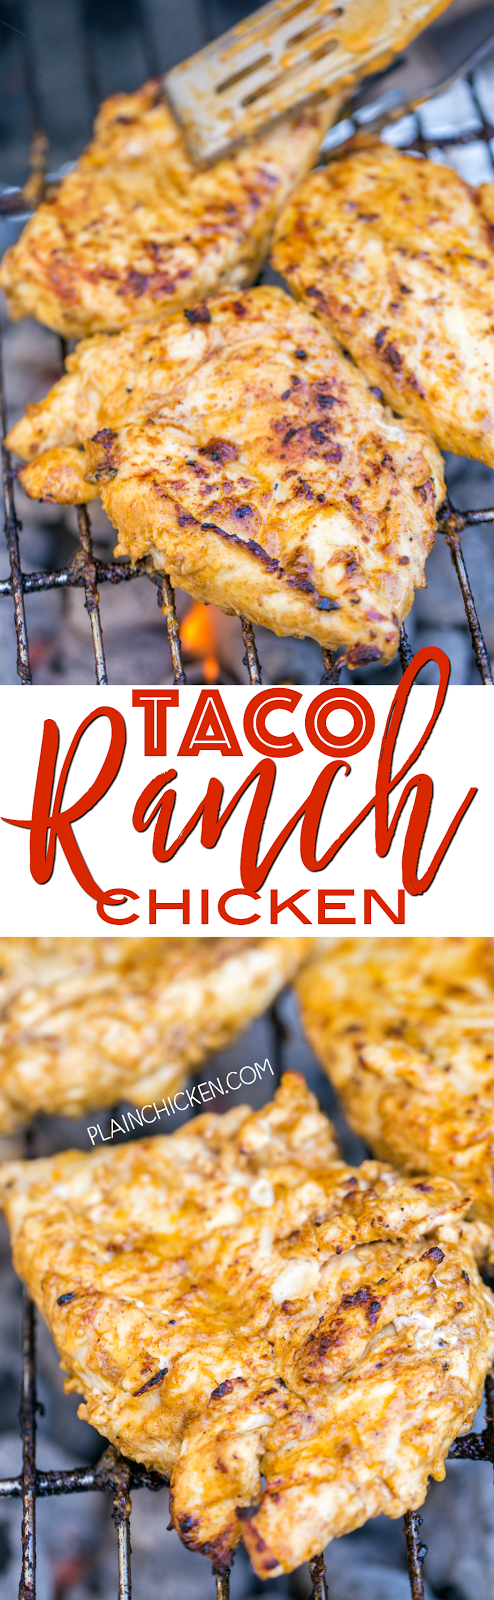 Taco Ranch Chicken – our favorite! SO easy and this tastes delicious! Only 6 ingredients – olive oil, Ranch dressing, taco